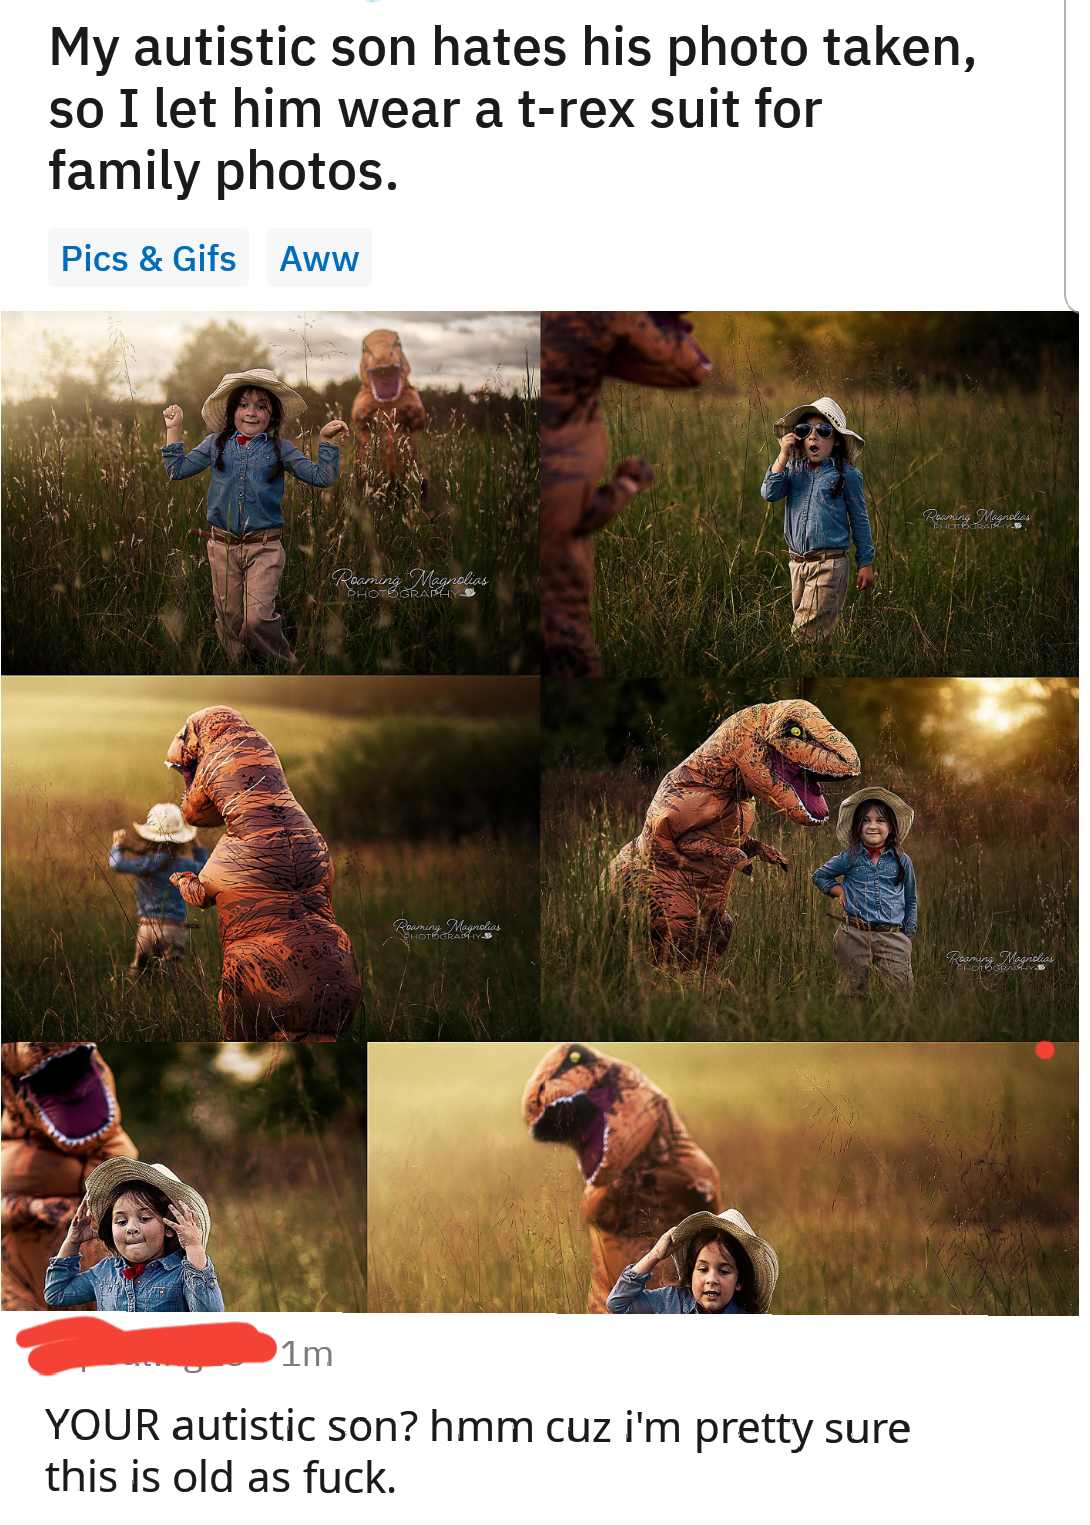 grass - My autistic son hates his photo taken, so I let him wear a trex suit for family photos. Pics & Gifs Aww Your autistic son? hmm cuz i'm pretty sure this is old as fuck.